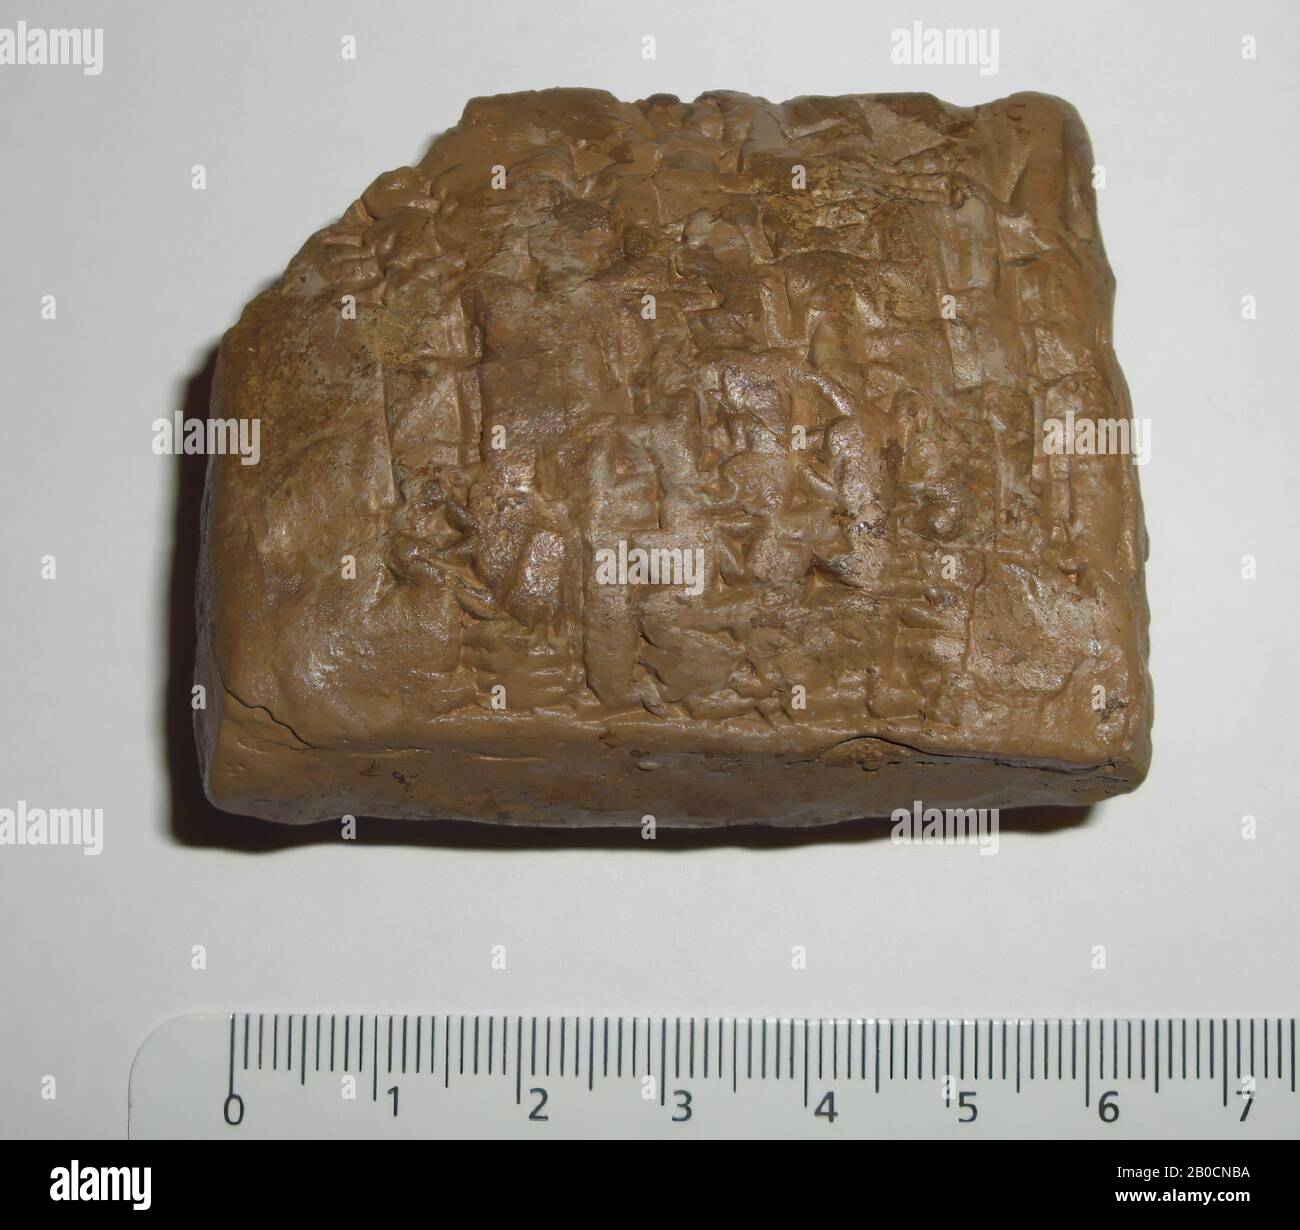 clay tablet SAB 1999, T 98-125, casting clay tablet, plaster, 6.3 x 5.0 cm, modern Stock Photo